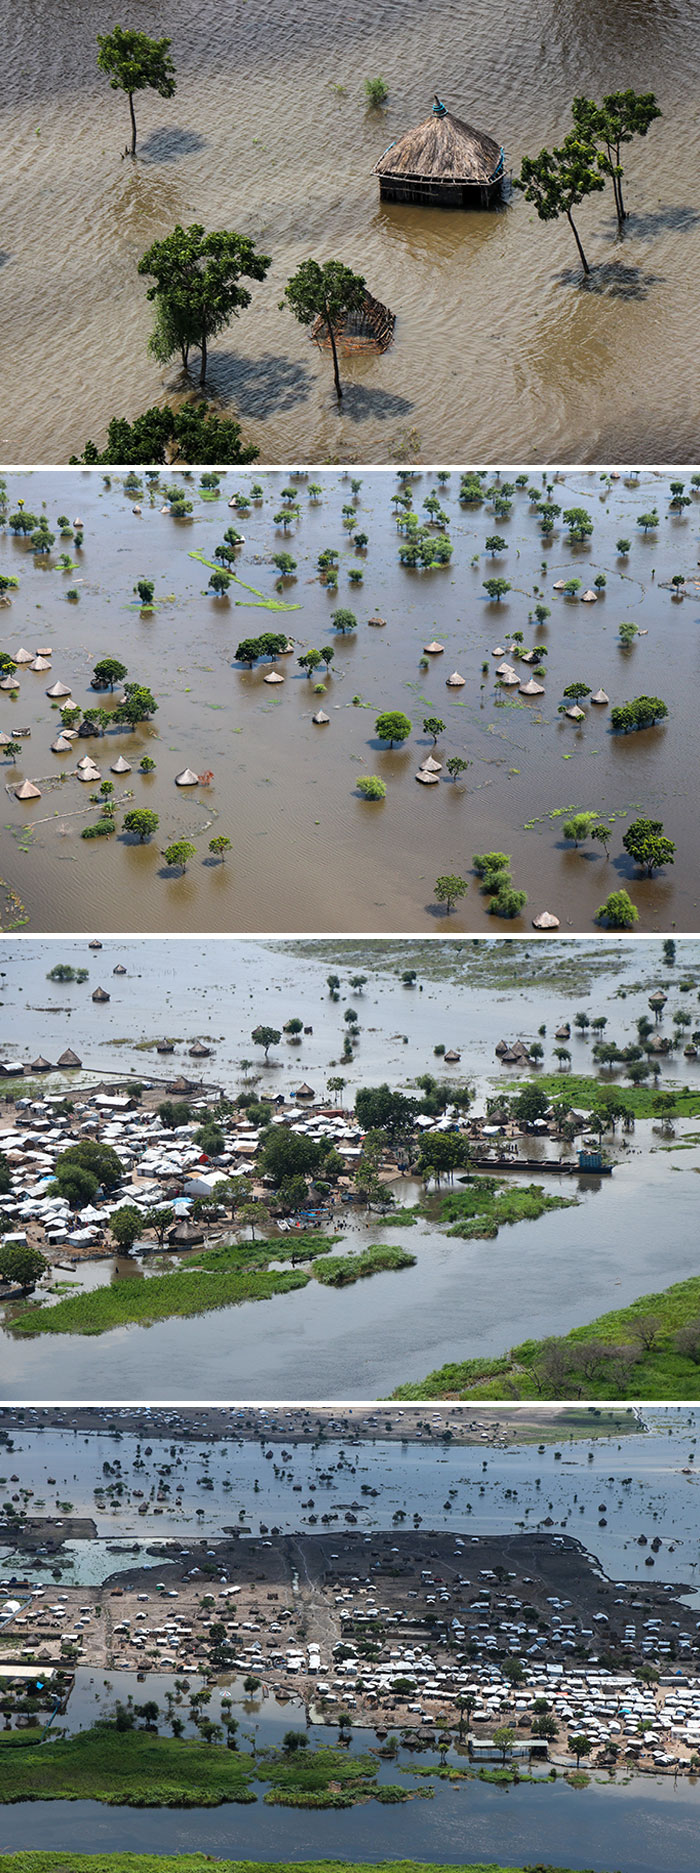 The Worst Floods In 60 Years In South Sudan. Catastrophic Floods Have Forced Nearly 750k People Out Of Their Homes